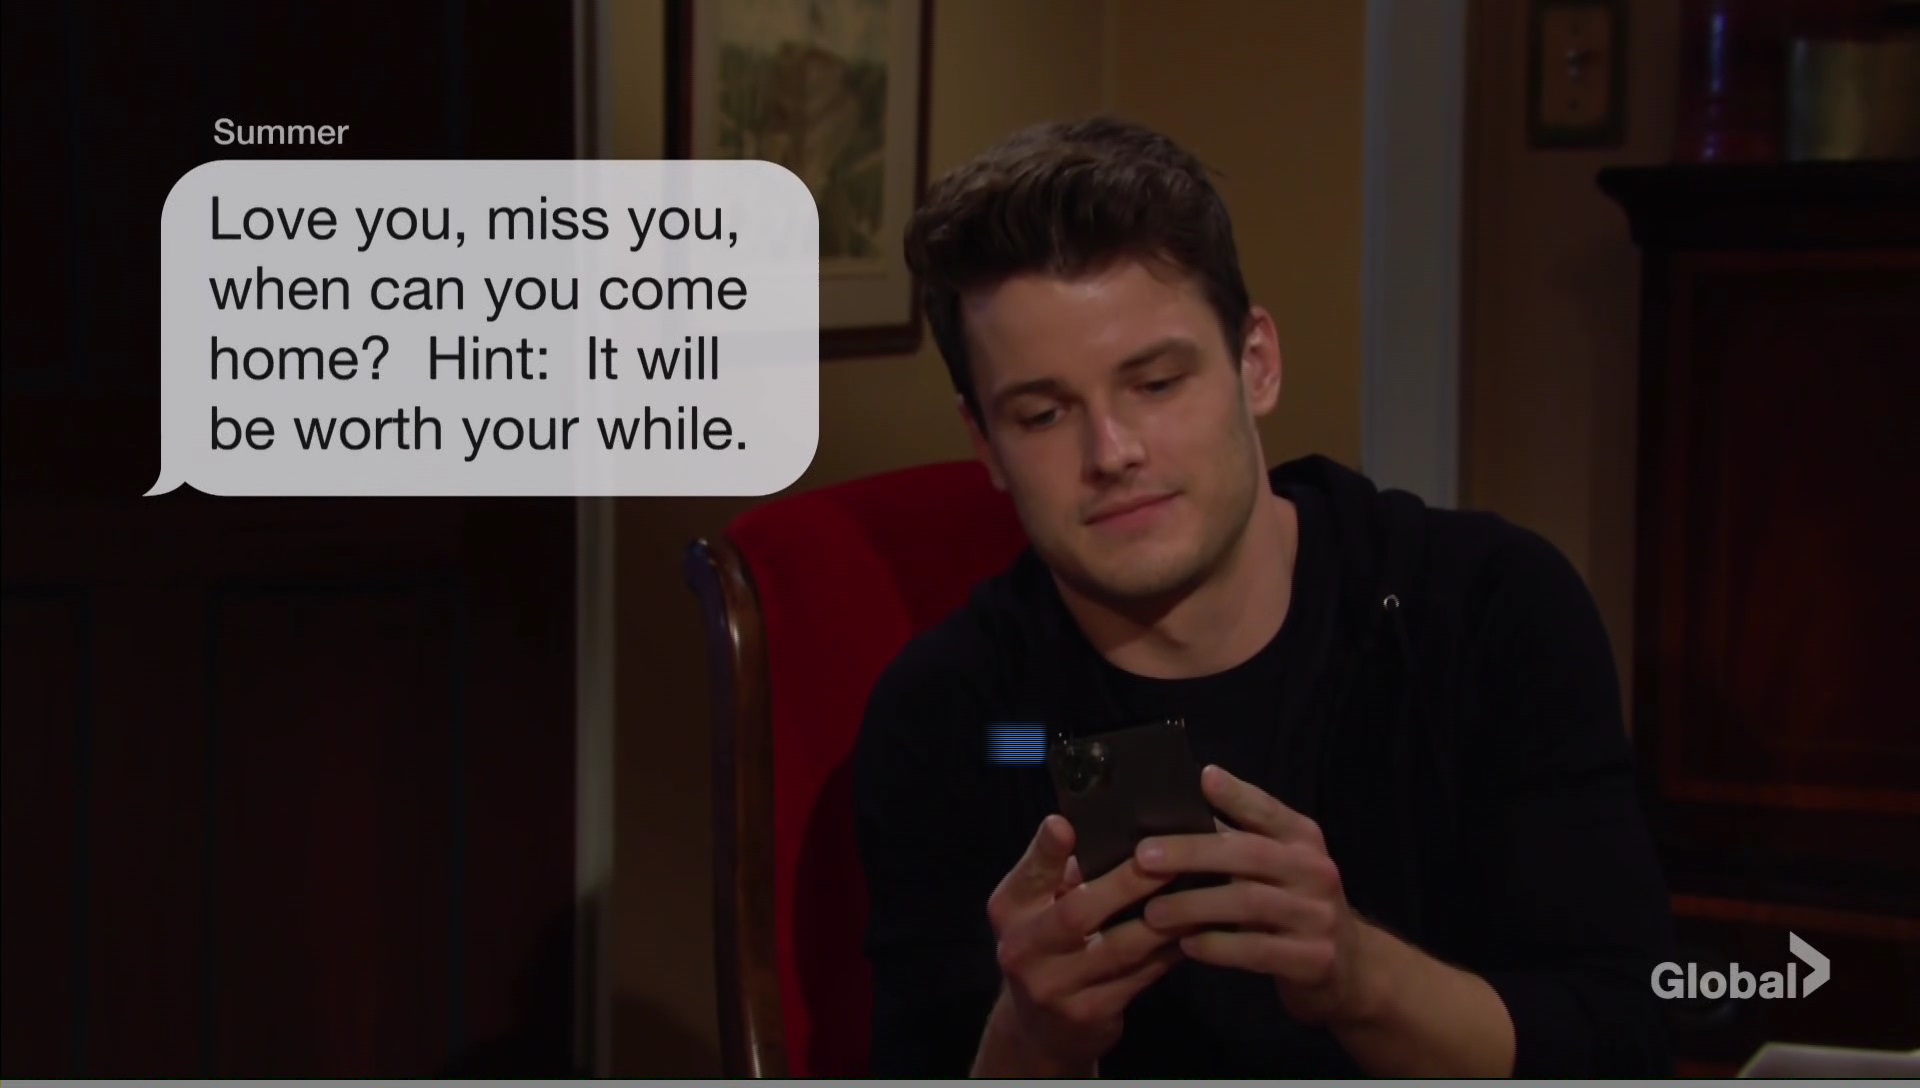 kyle texts summer young restless